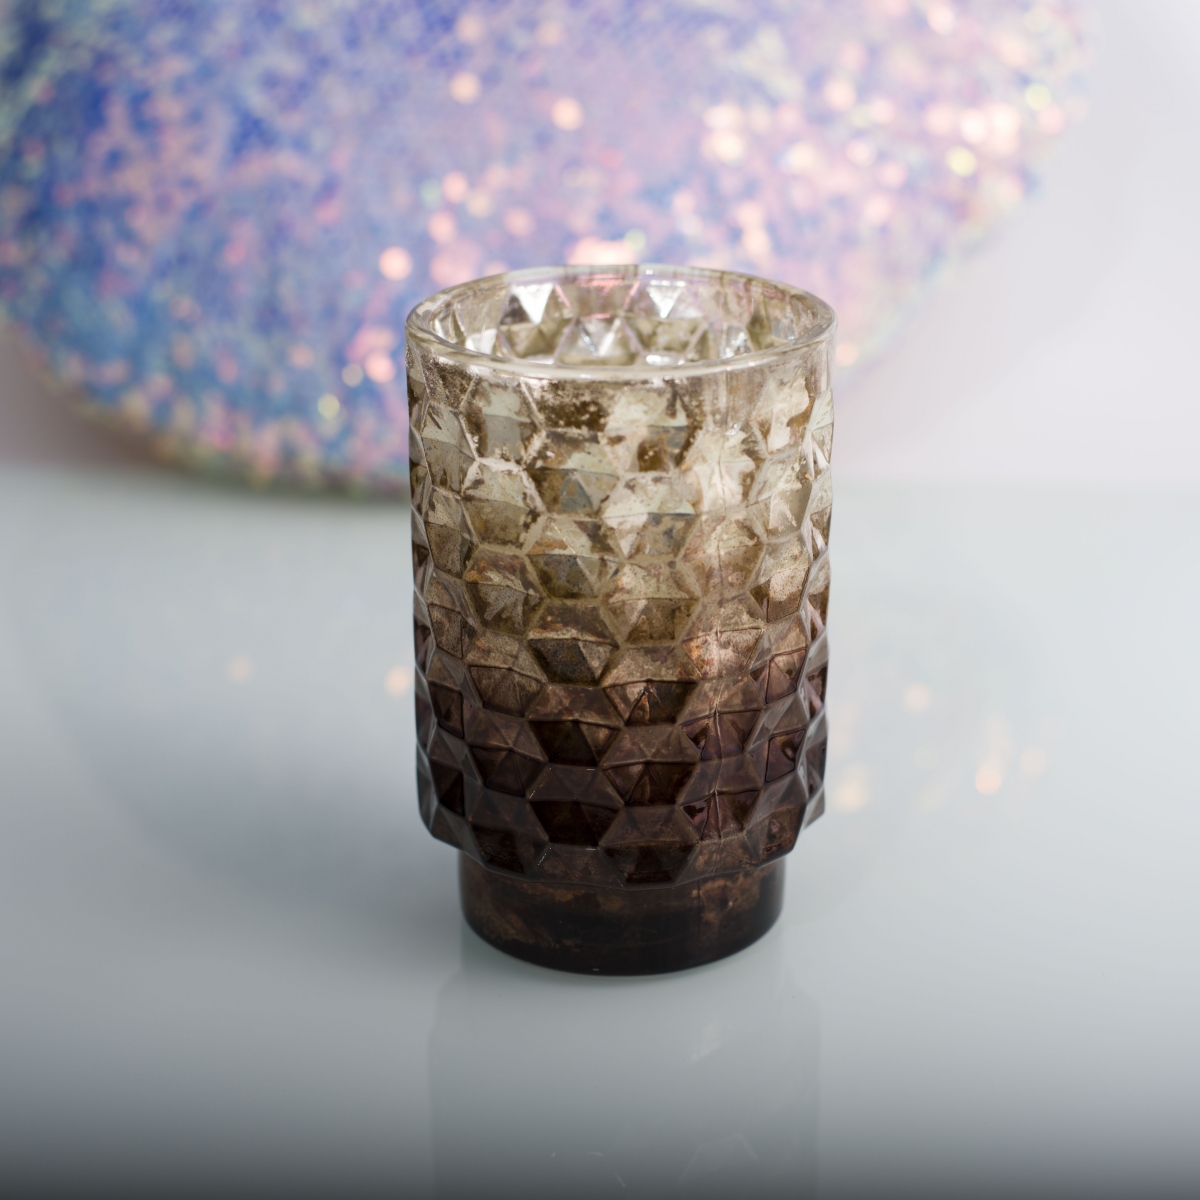 Soy Candles : Champagne Candles, Honeycomb Glass Jar , Stress Relief ,China Factory ,Wholesale Price-HOWCANDLE-Candles,Scented Candles,Aromatherapy Candles,Soy Candles,Vegan Candles,Jar Candles,Pillar Candles,Candle Gift Sets,Essential Oils,Reed Diffuser,Candle Holder,